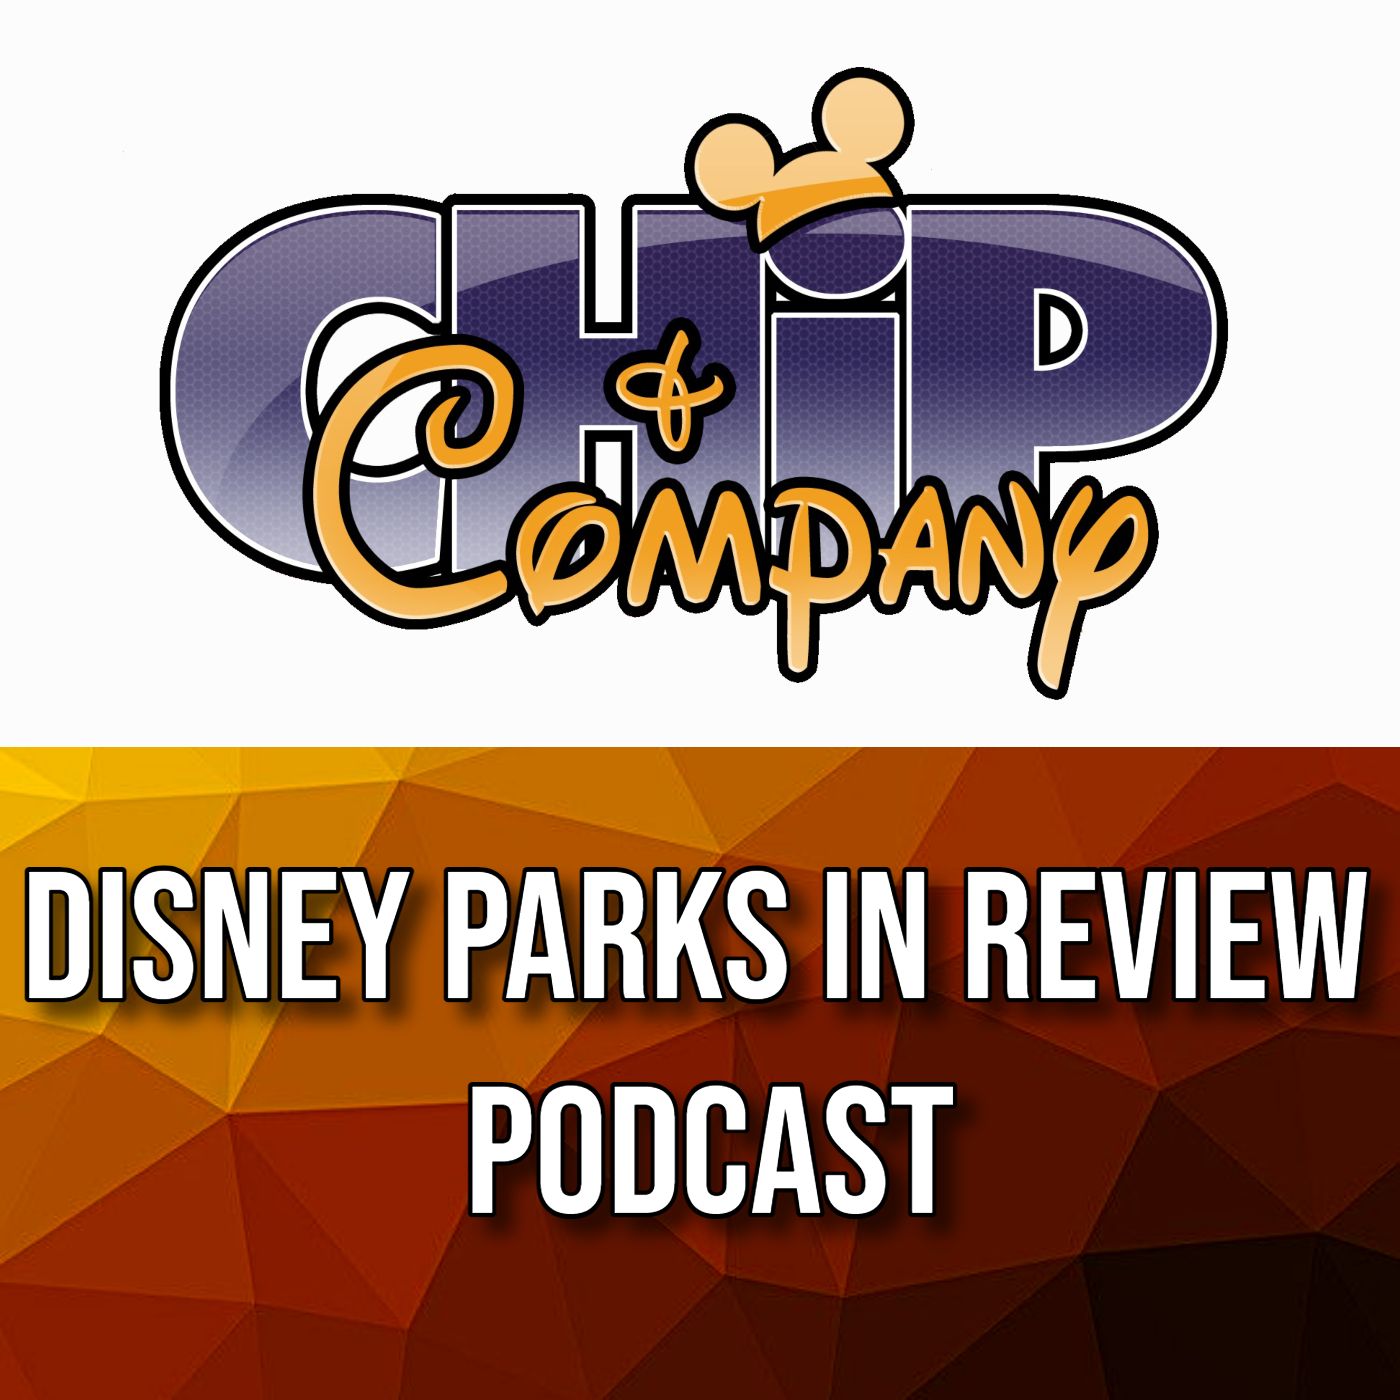 Disney Parks in Review - Walt Disney World Railroad Track Construction, and Disney Loungefly Bags Galore